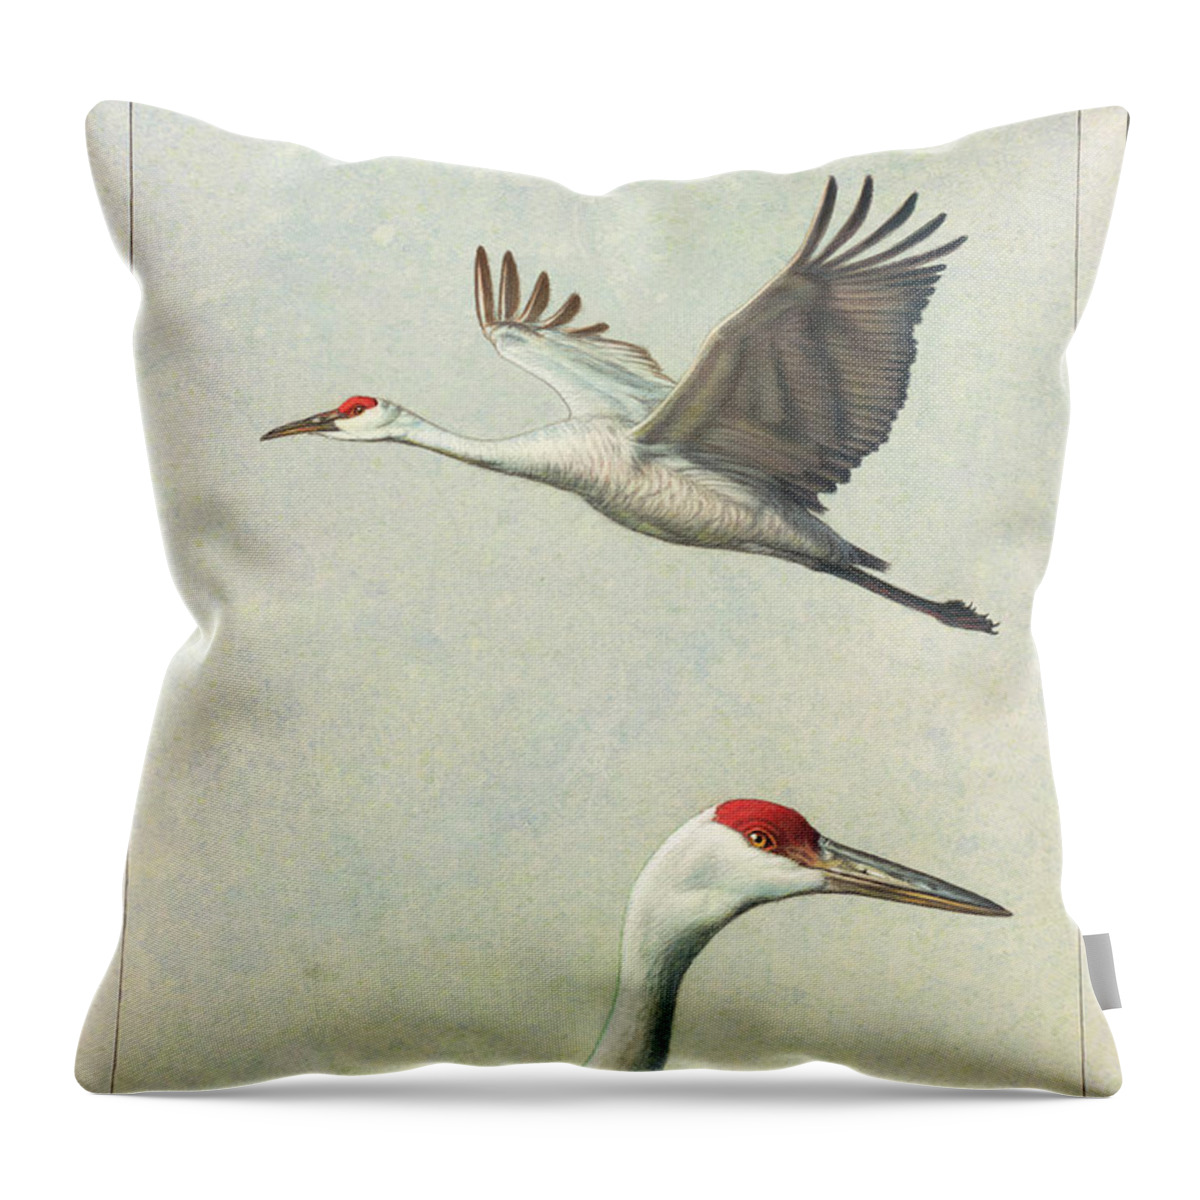 Crane Throw Pillow featuring the painting Sandhill Cranes by James W Johnson